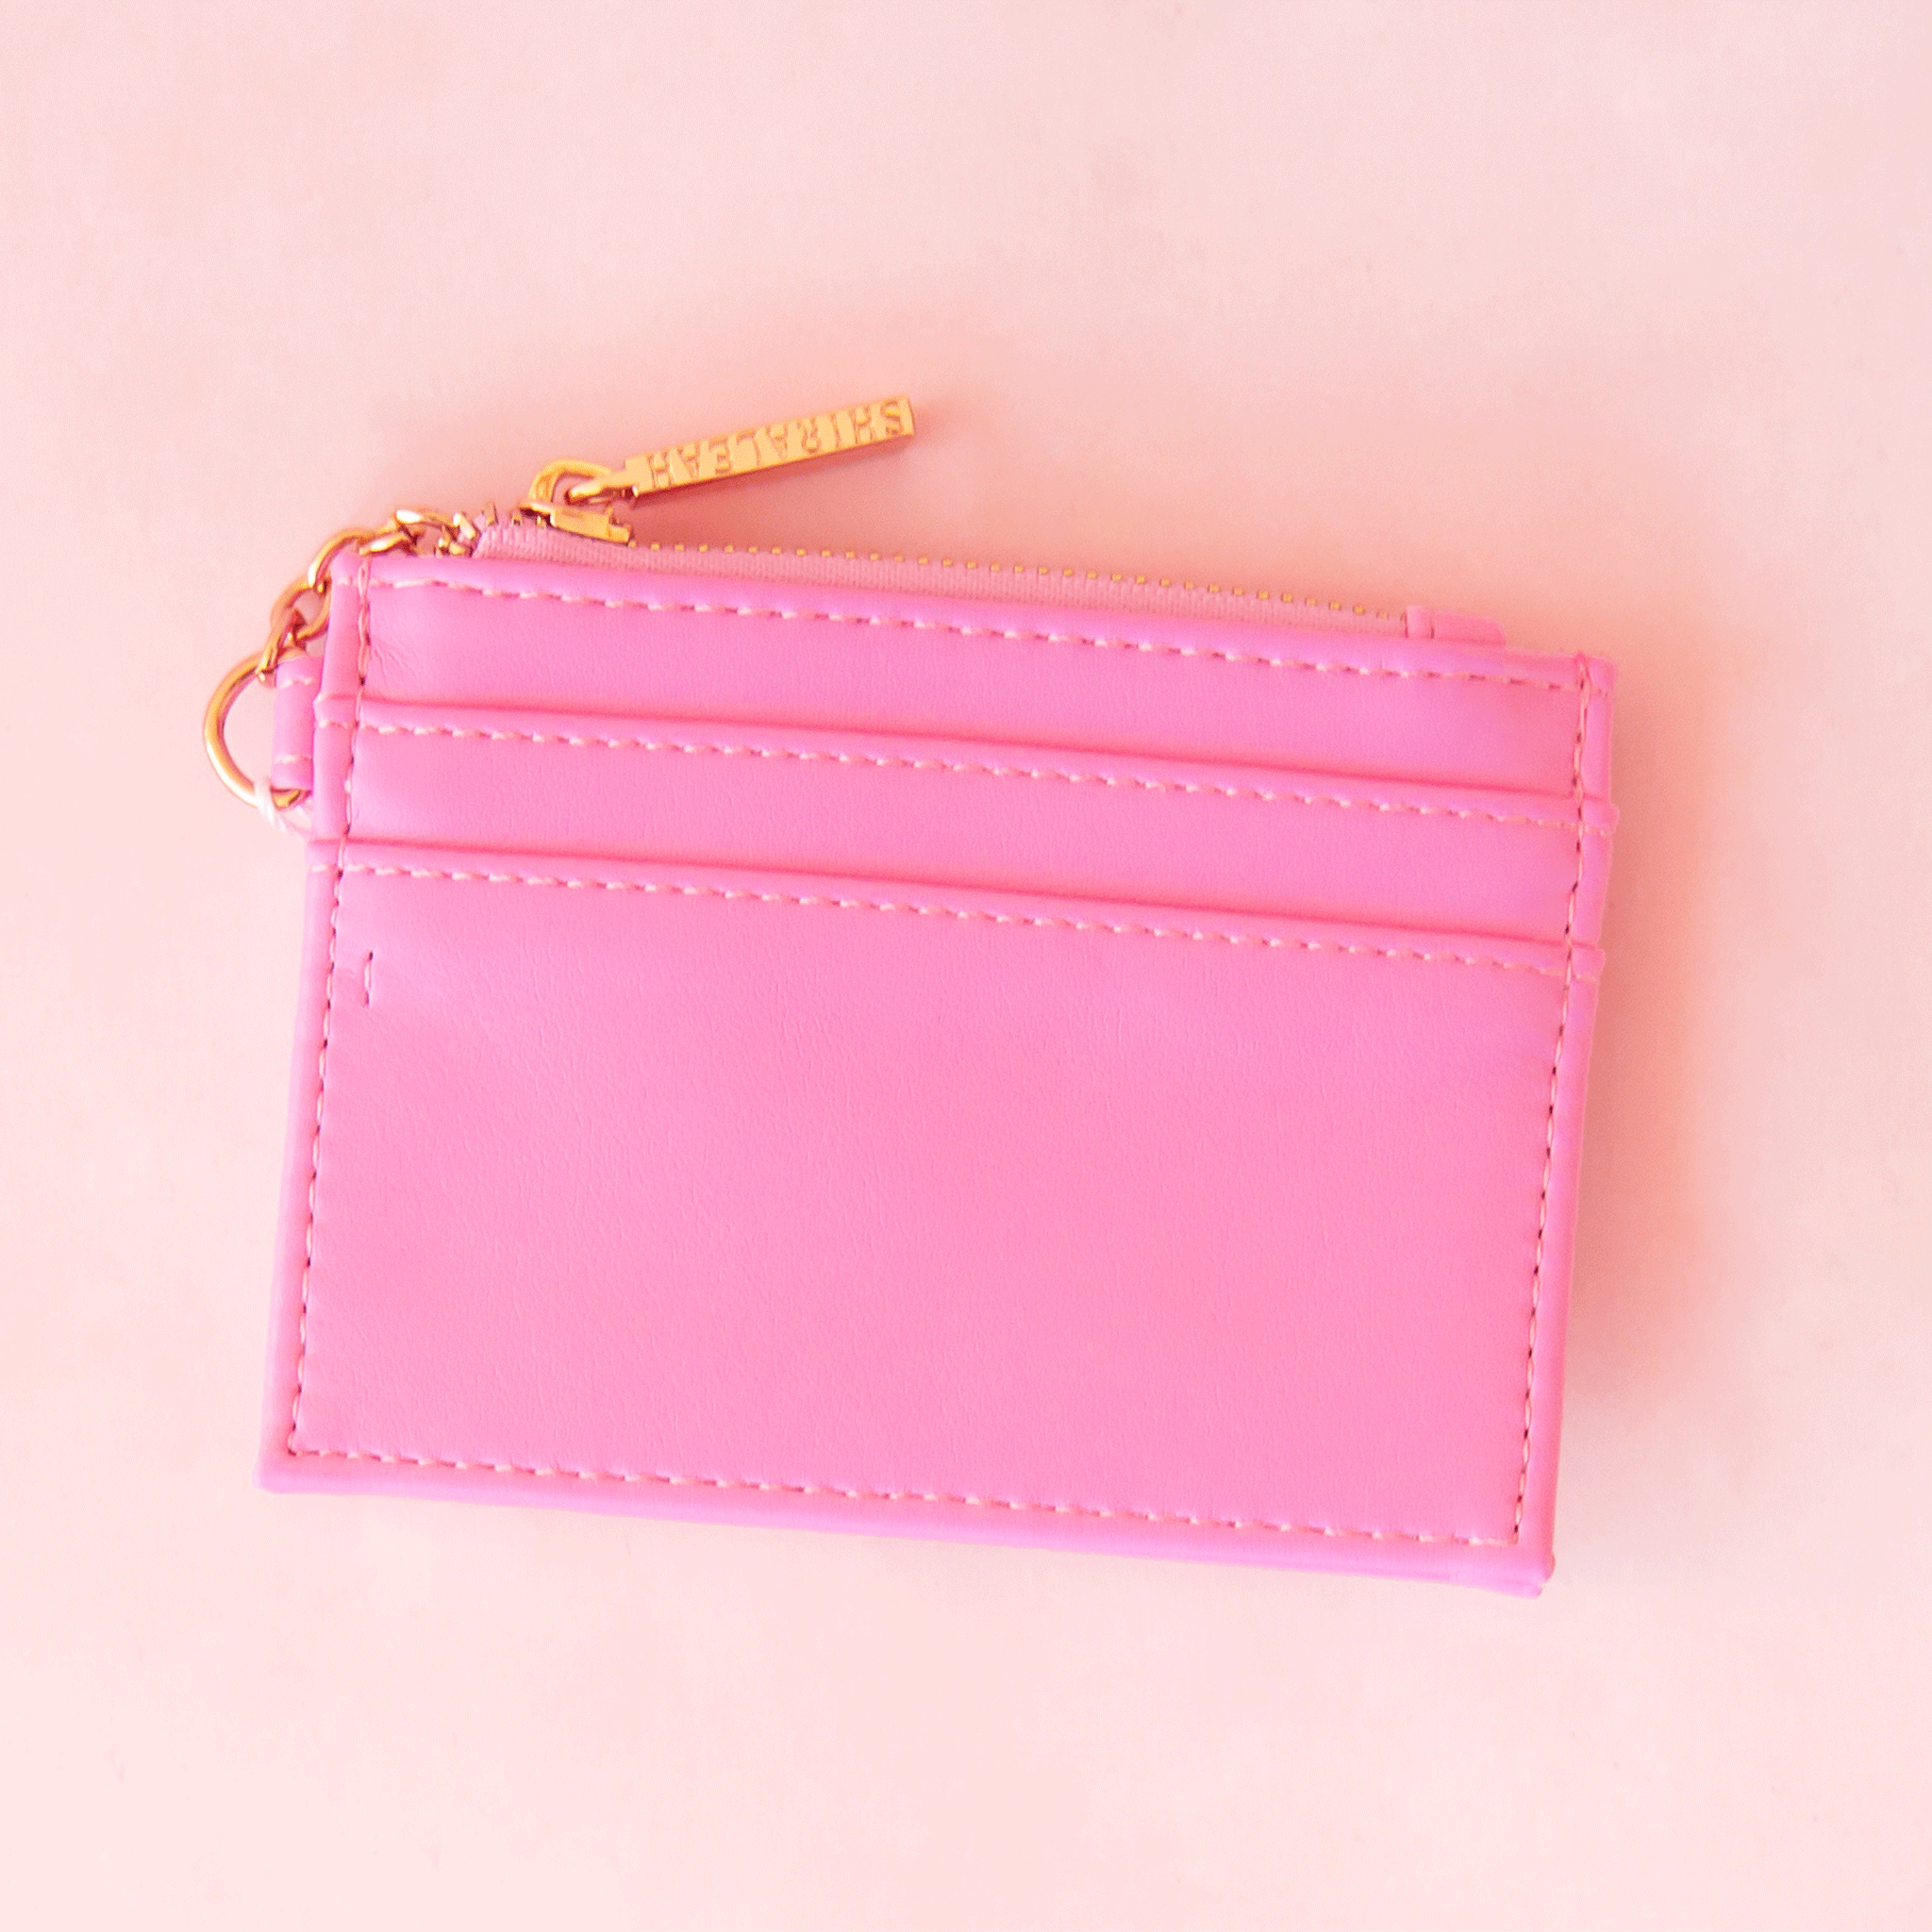 On a pink background is a bubble gum pink card case with a gold zipper and details. 